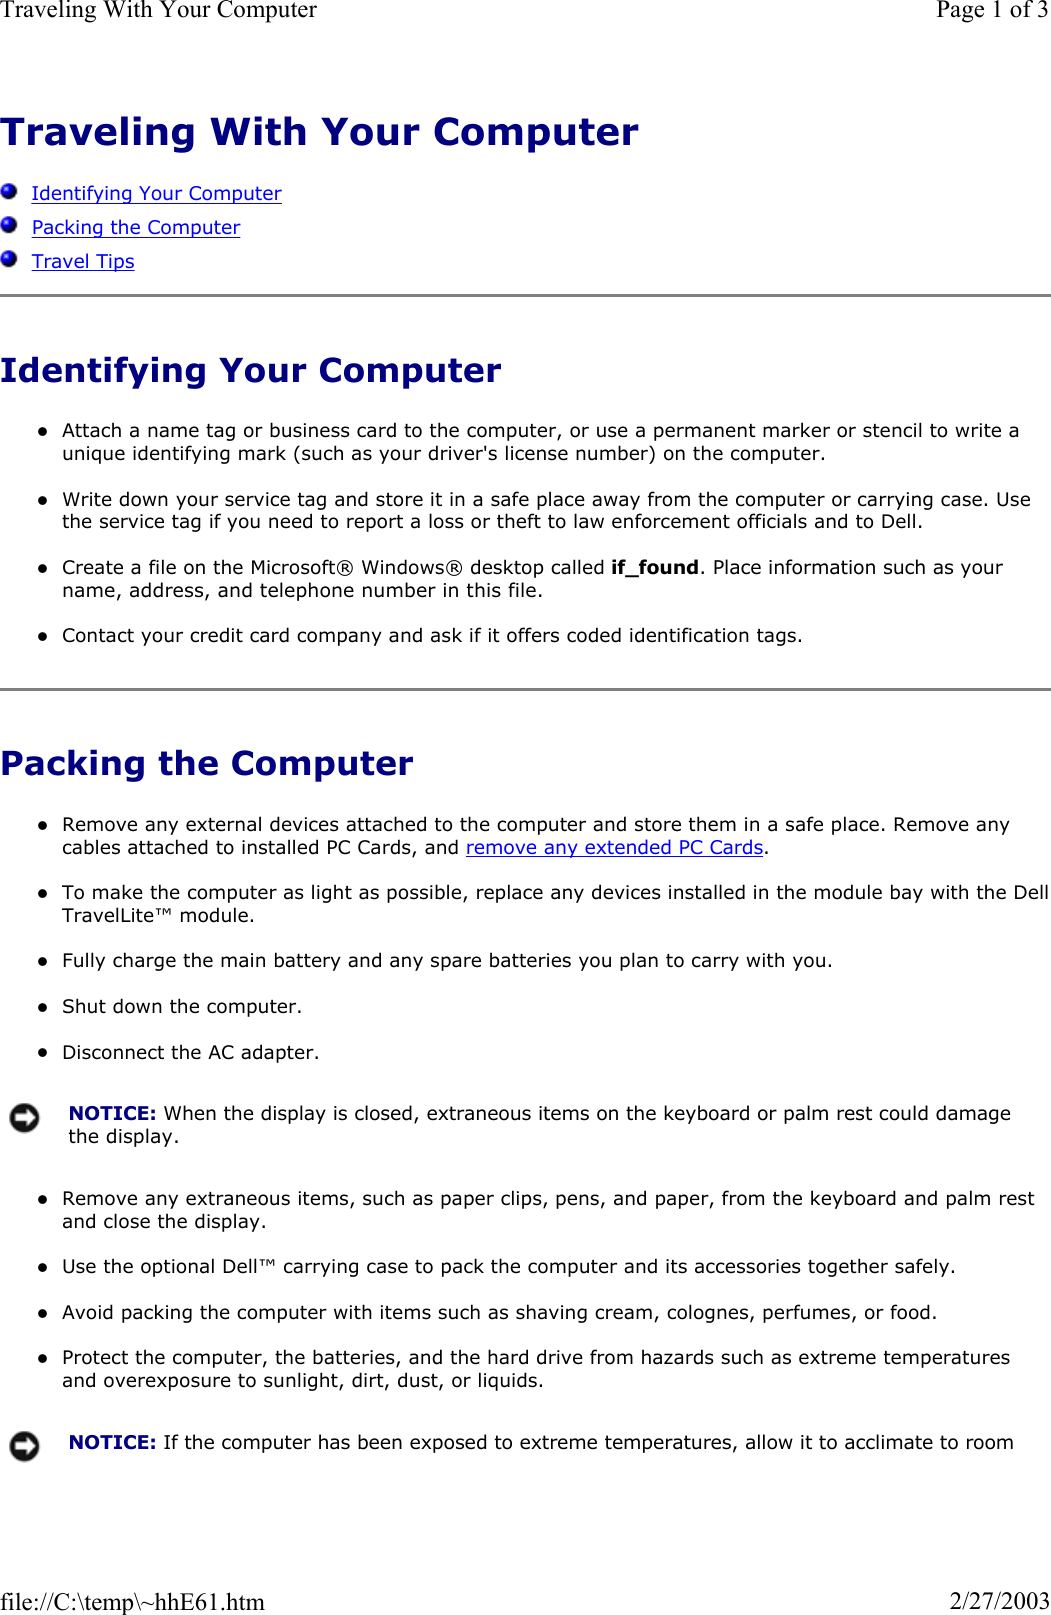 Traveling With Your ComputerIdentifying Your ComputerPacking the ComputerTravel TipsIdentifying Your Computer zAttach a name tag or business card to the computer, or use a permanent marker or stencil to write a unique identifying mark (such as your driver&apos;s license number) on the computer. zWrite down your service tag and store it in a safe place away from the computer or carrying case. Use the service tag if you need to report a loss or theft to law enforcement officials and to Dell. zCreate a file on the Microsoft® Windows® desktop called if_found. Place information such as your name, address, and telephone number in this file. zContact your credit card company and ask if it offers coded identification tags. Packing the Computer zRemove any external devices attached to the computer and store them in a safe place. Remove any cables attached to installed PC Cards, and remove any extended PC Cards.zTo make the computer as light as possible, replace any devices installed in the module bay with the DellTravelLite™ module. zFully charge the main battery and any spare batteries you plan to carry with you. zShut down the computer. zDisconnect the AC adapter. zRemove any extraneous items, such as paper clips, pens, and paper, from the keyboard and palm rest and close the display. zUse the optional Dell™ carrying case to pack the computer and its accessories together safely. zAvoid packing the computer with items such as shaving cream, colognes, perfumes, or food. zProtect the computer, the batteries, and the hard drive from hazards such as extreme temperatures and overexposure to sunlight, dirt, dust, or liquids. NOTICE: When the display is closed, extraneous items on the keyboard or palm rest could damage the display.NOTICE: If the computer has been exposed to extreme temperatures, allow it to acclimate to room Page 1 of 3Traveling With Your Computer2/27/2003file://C:\temp\~hhE61.htm